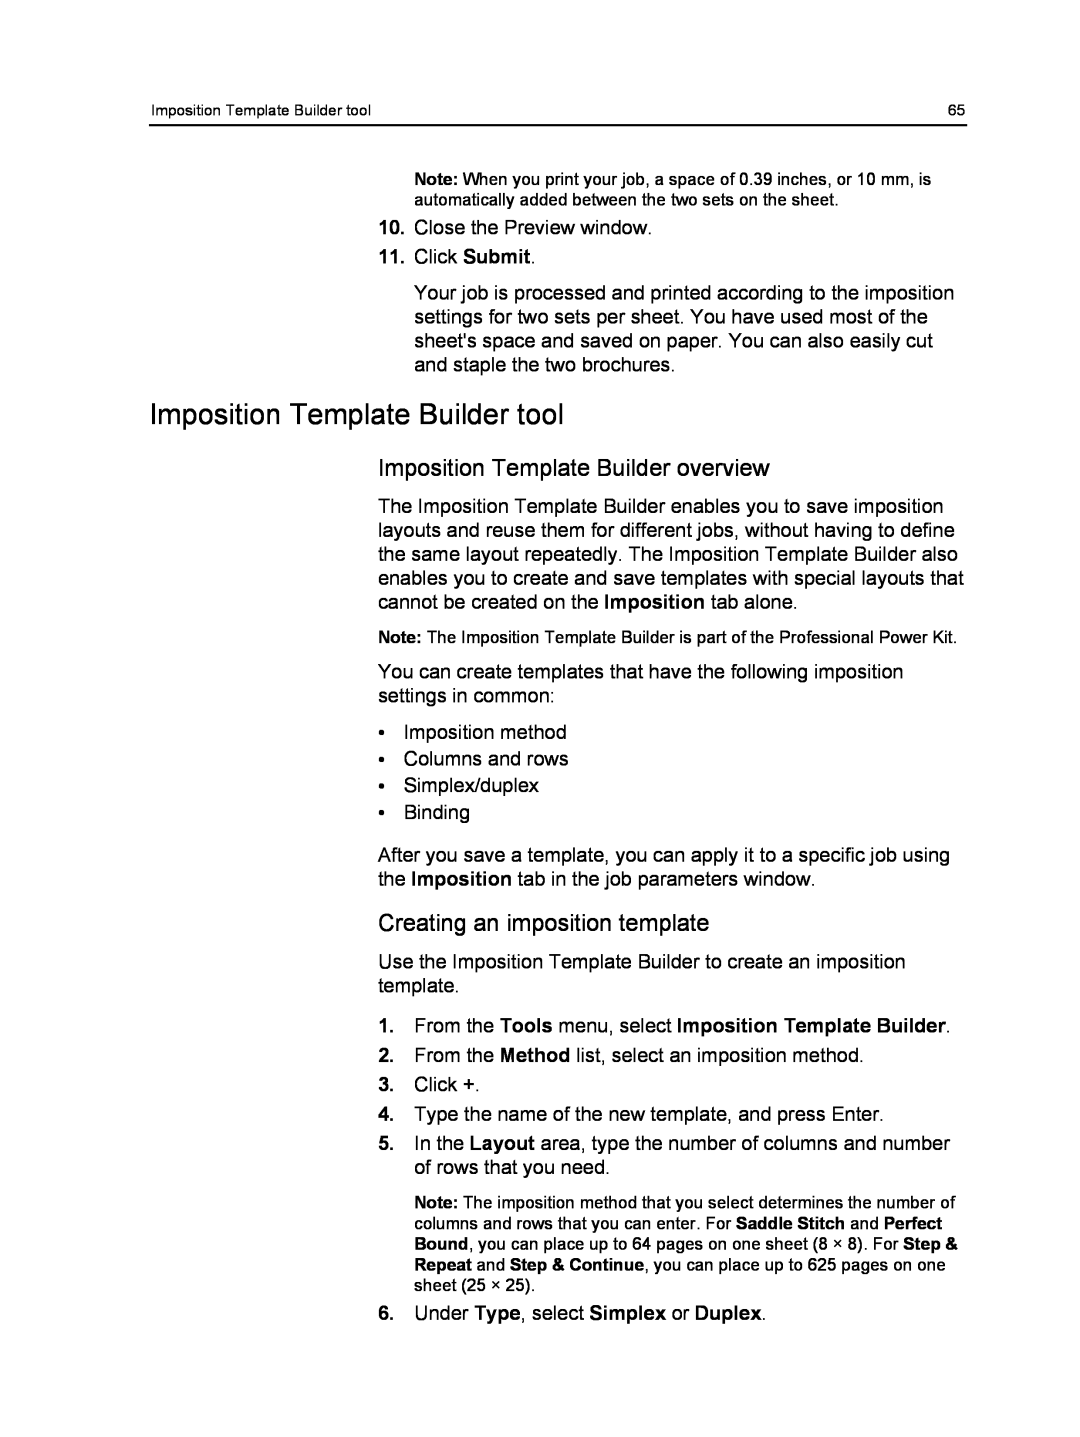 Xerox 550, 560 Imposition Template Builder tool, Imposition Template Builder overview, Creating an imposition template 